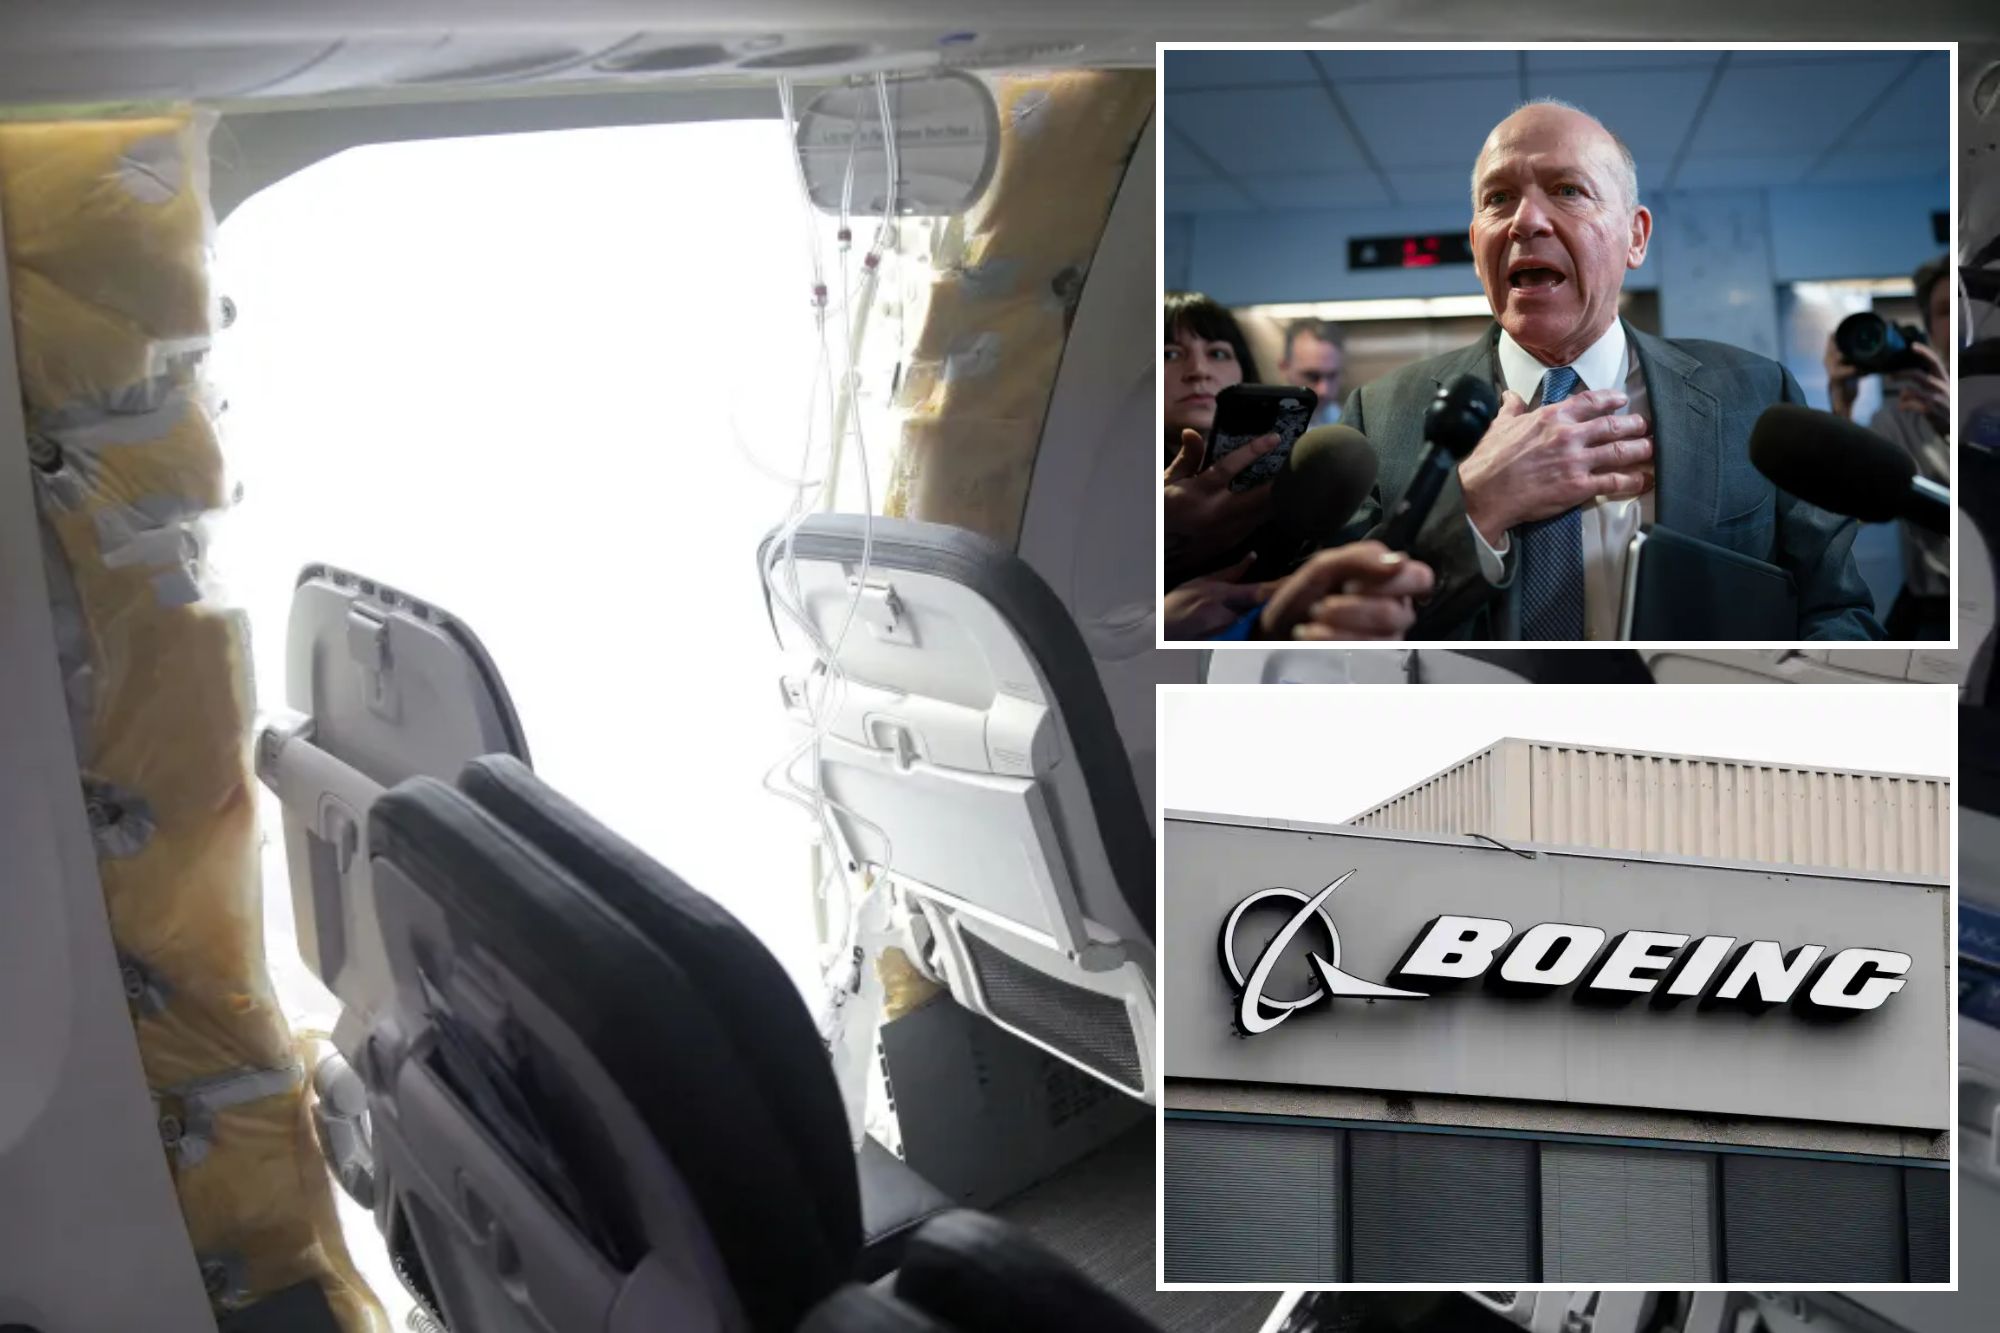 Boeing CEO Dave Calhoun, Alaska Airlines plane with missing door and Boeing logo